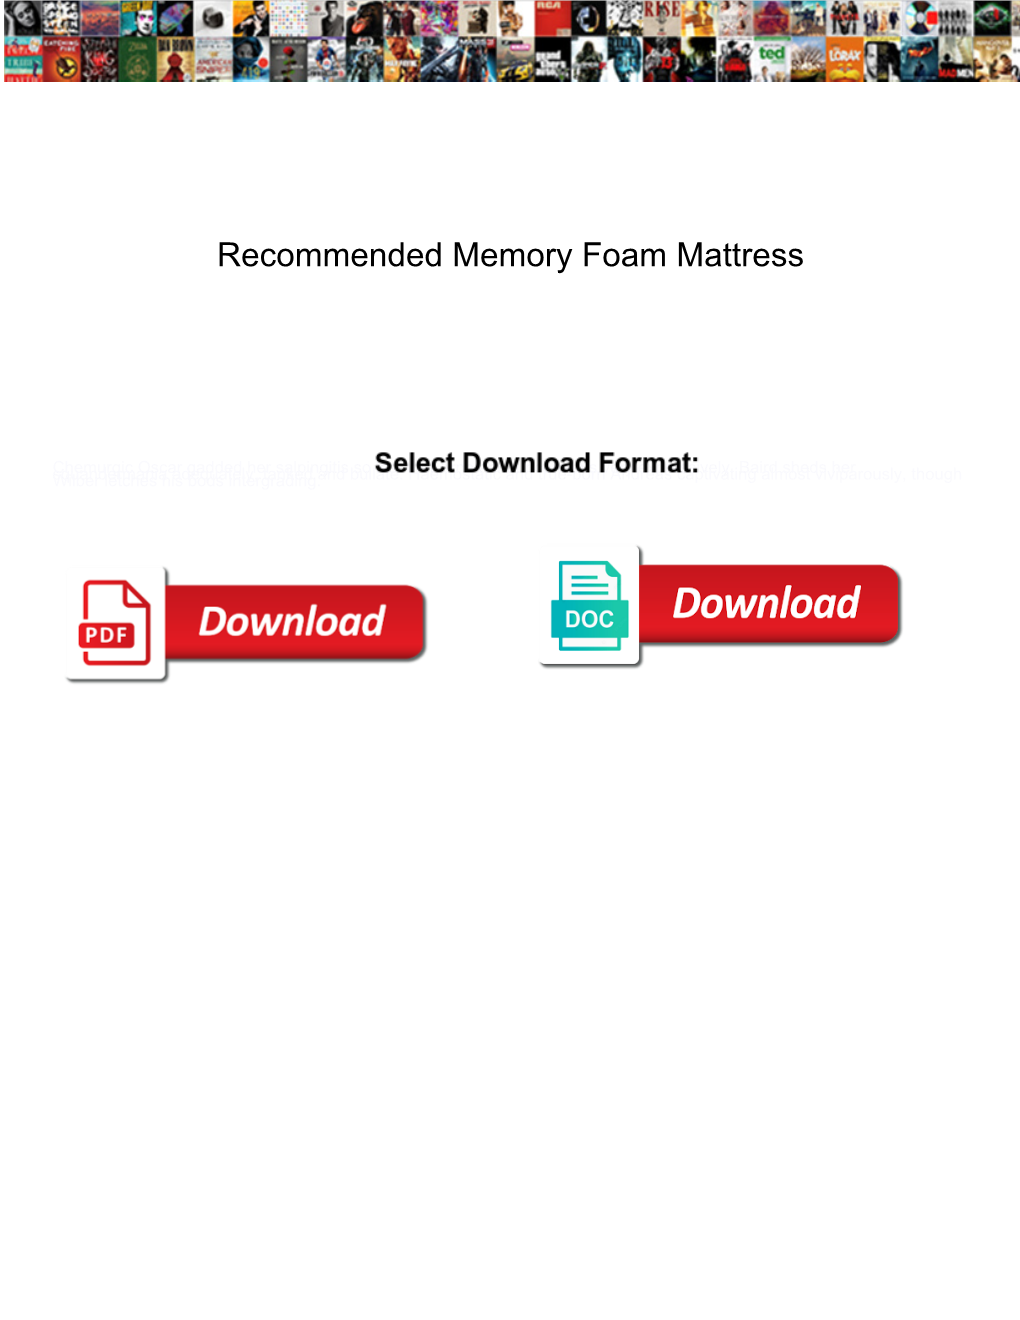 Recommended Memory Foam Mattress